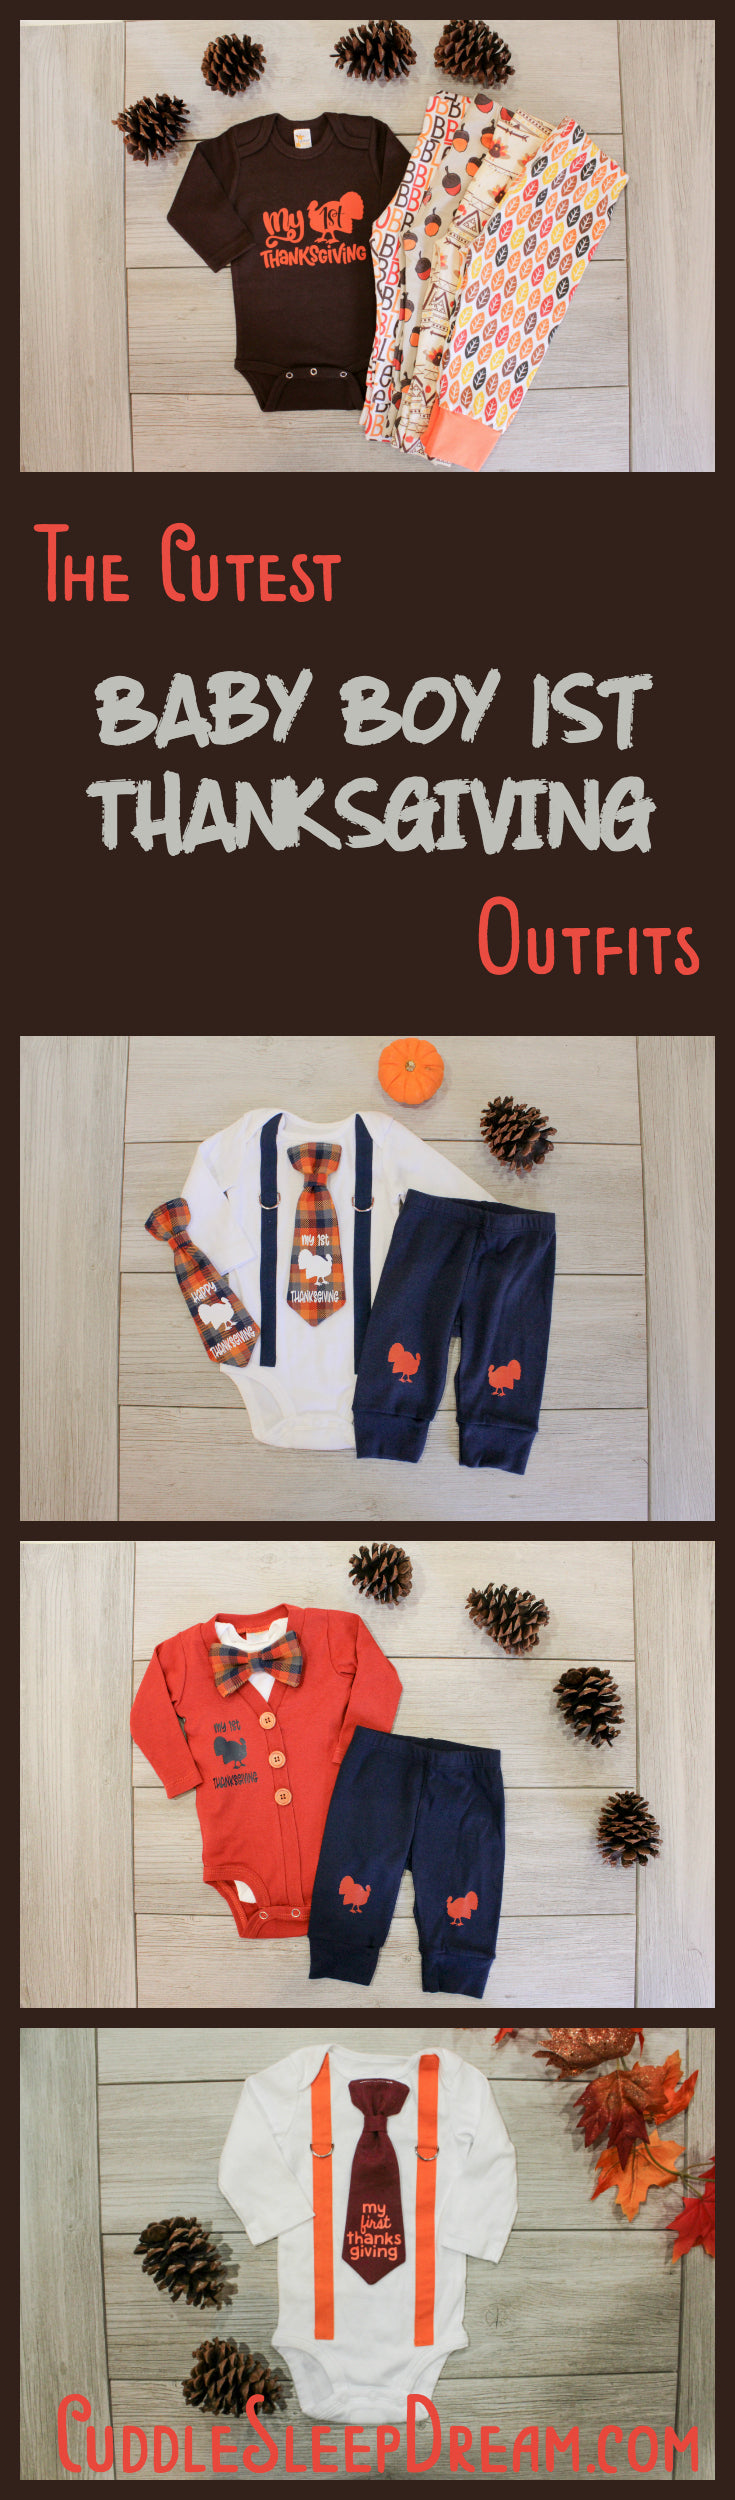 baby boy My 1st Thanksgiving Outfit ideas